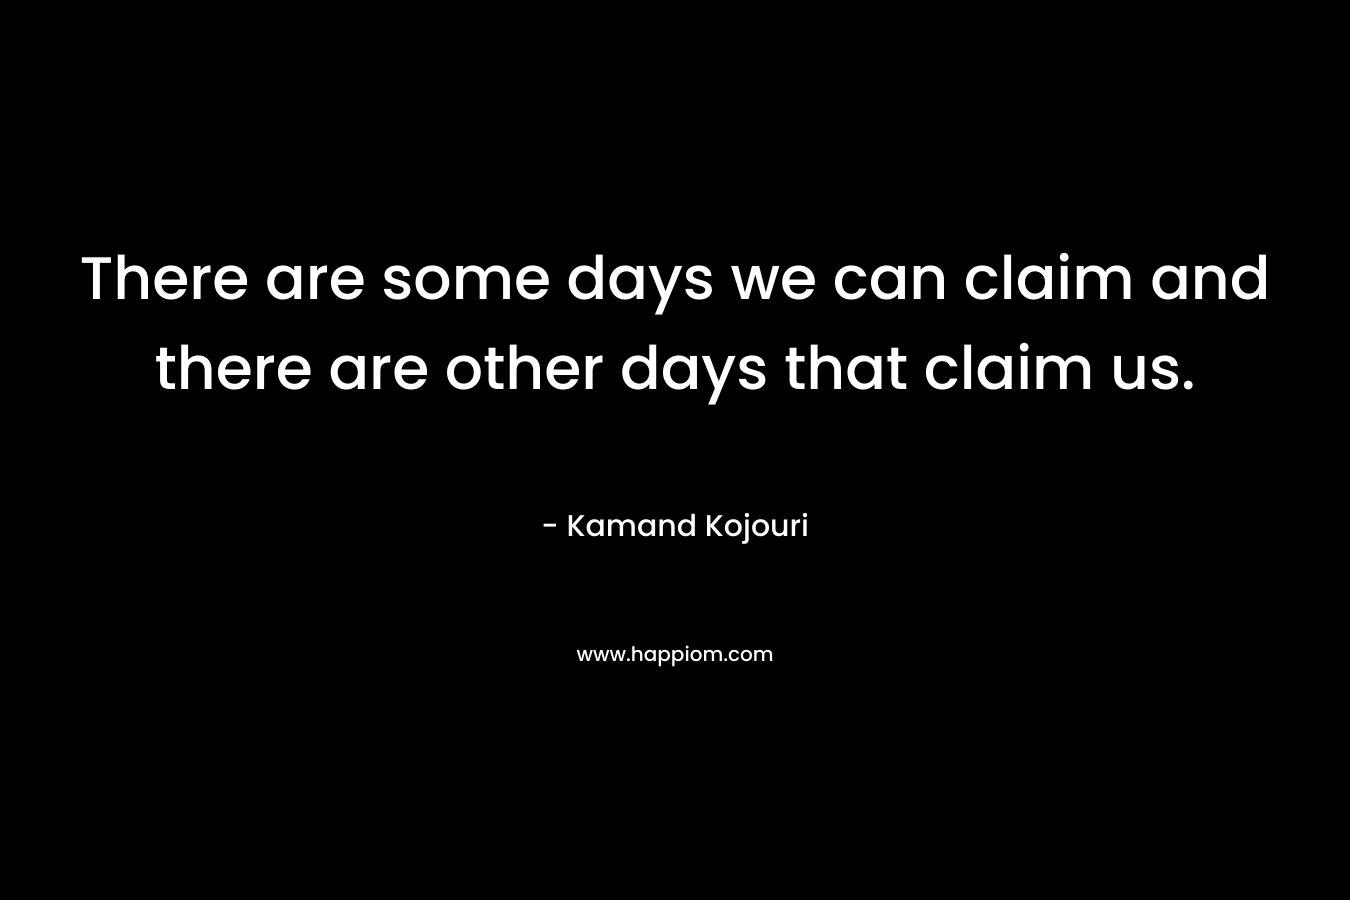 There are some days we can claim and there are other days that claim us.